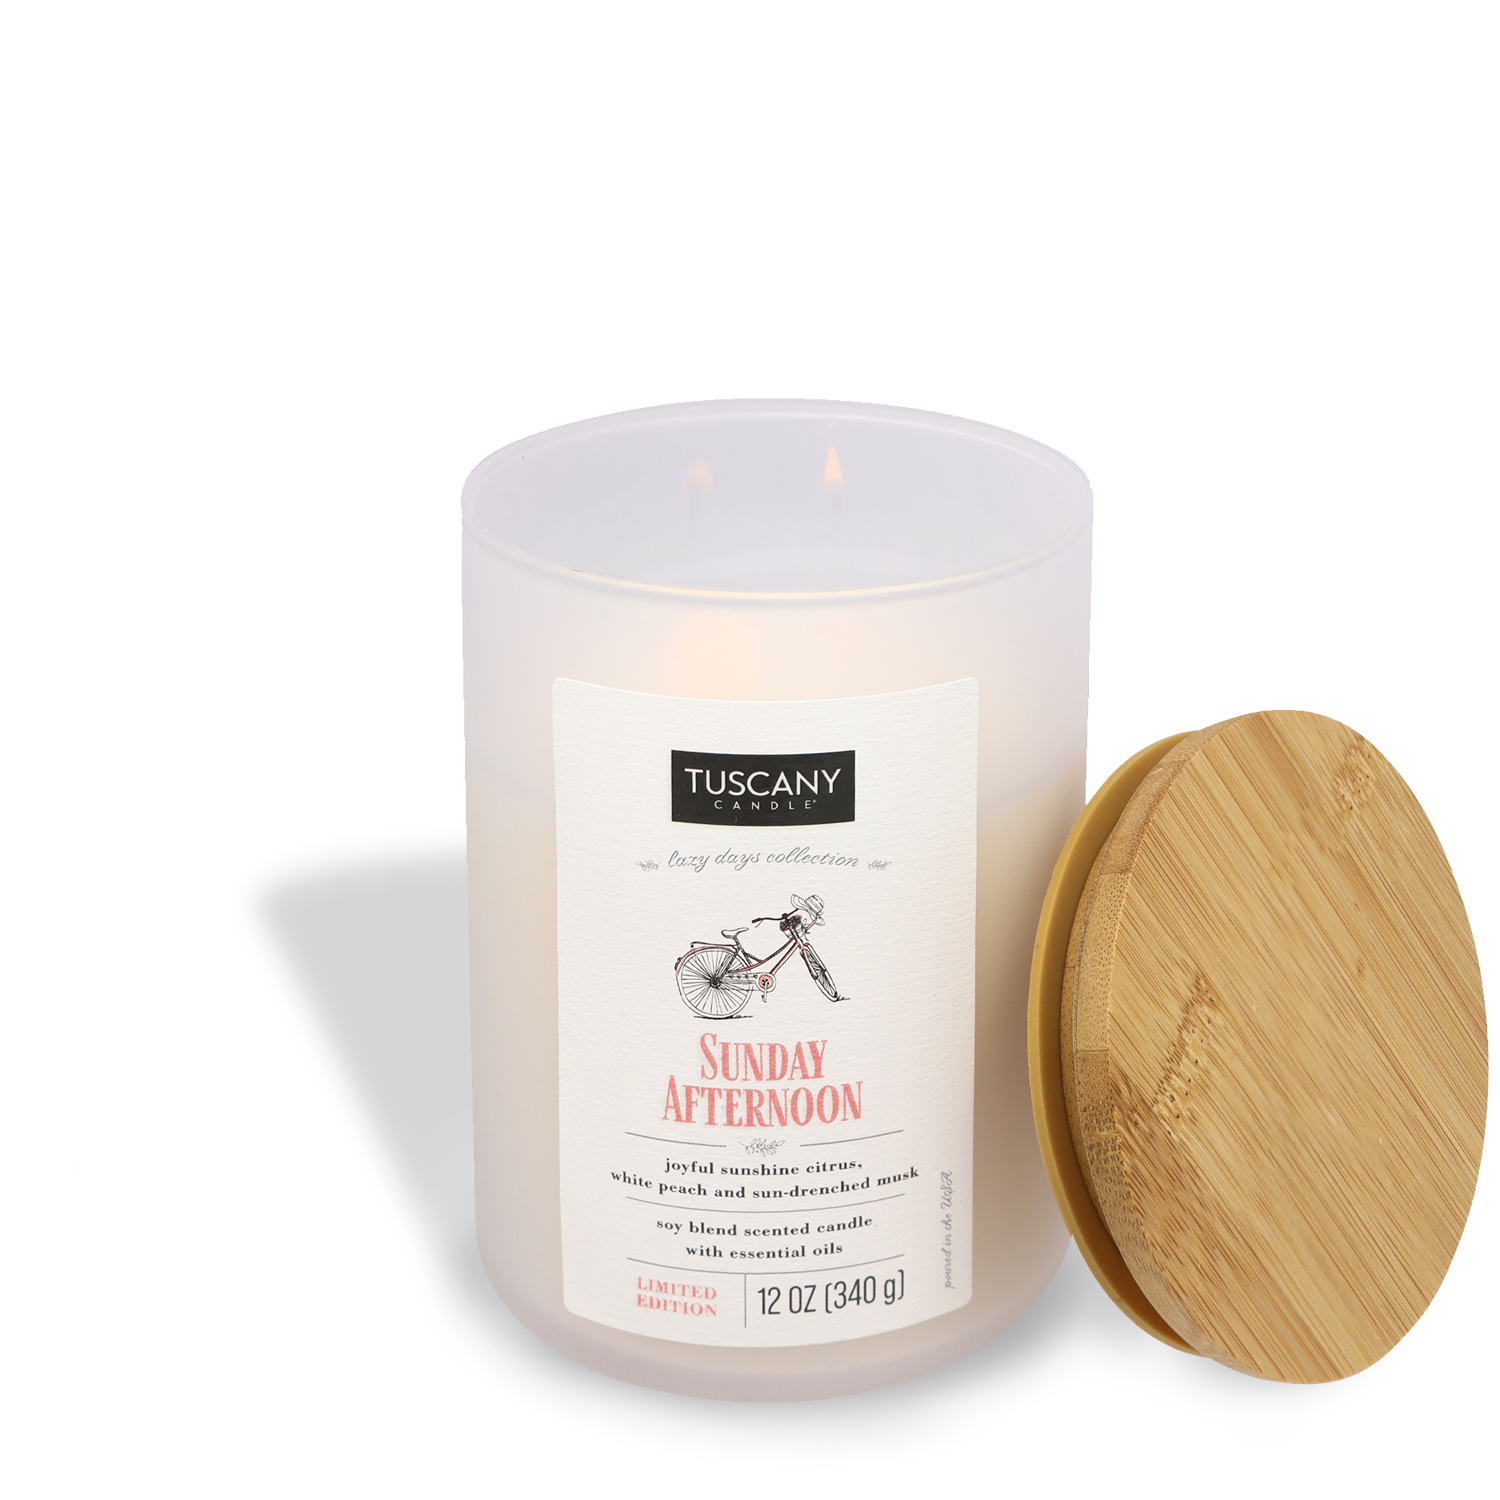 Sunday Afternoon scented candle with a wooden lid on a white background by Tuscany Candle® SEASONAL.